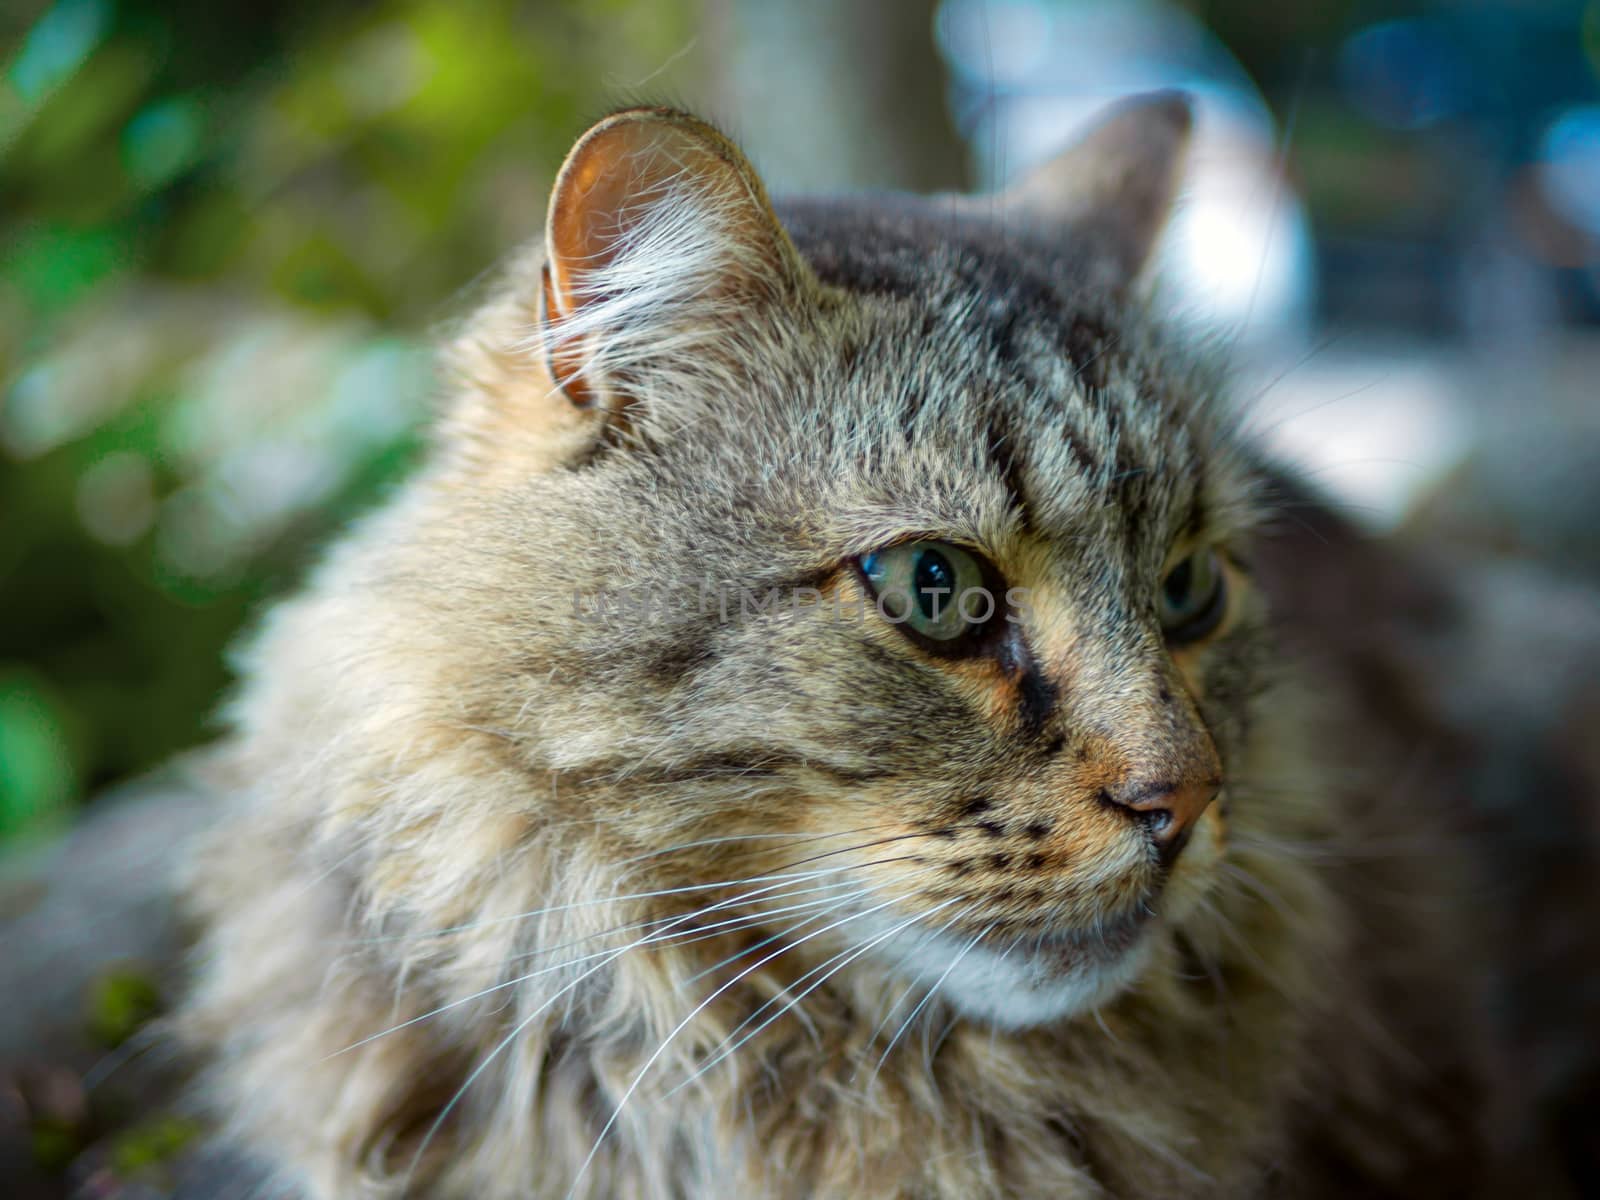 Beautiful big grey cat with green eyes. A homeless cat walks in nature, in the countryside. Sunny day, a cat in the shade under a tree. Close-up, blurred bokeh background. Kitten Is Resting